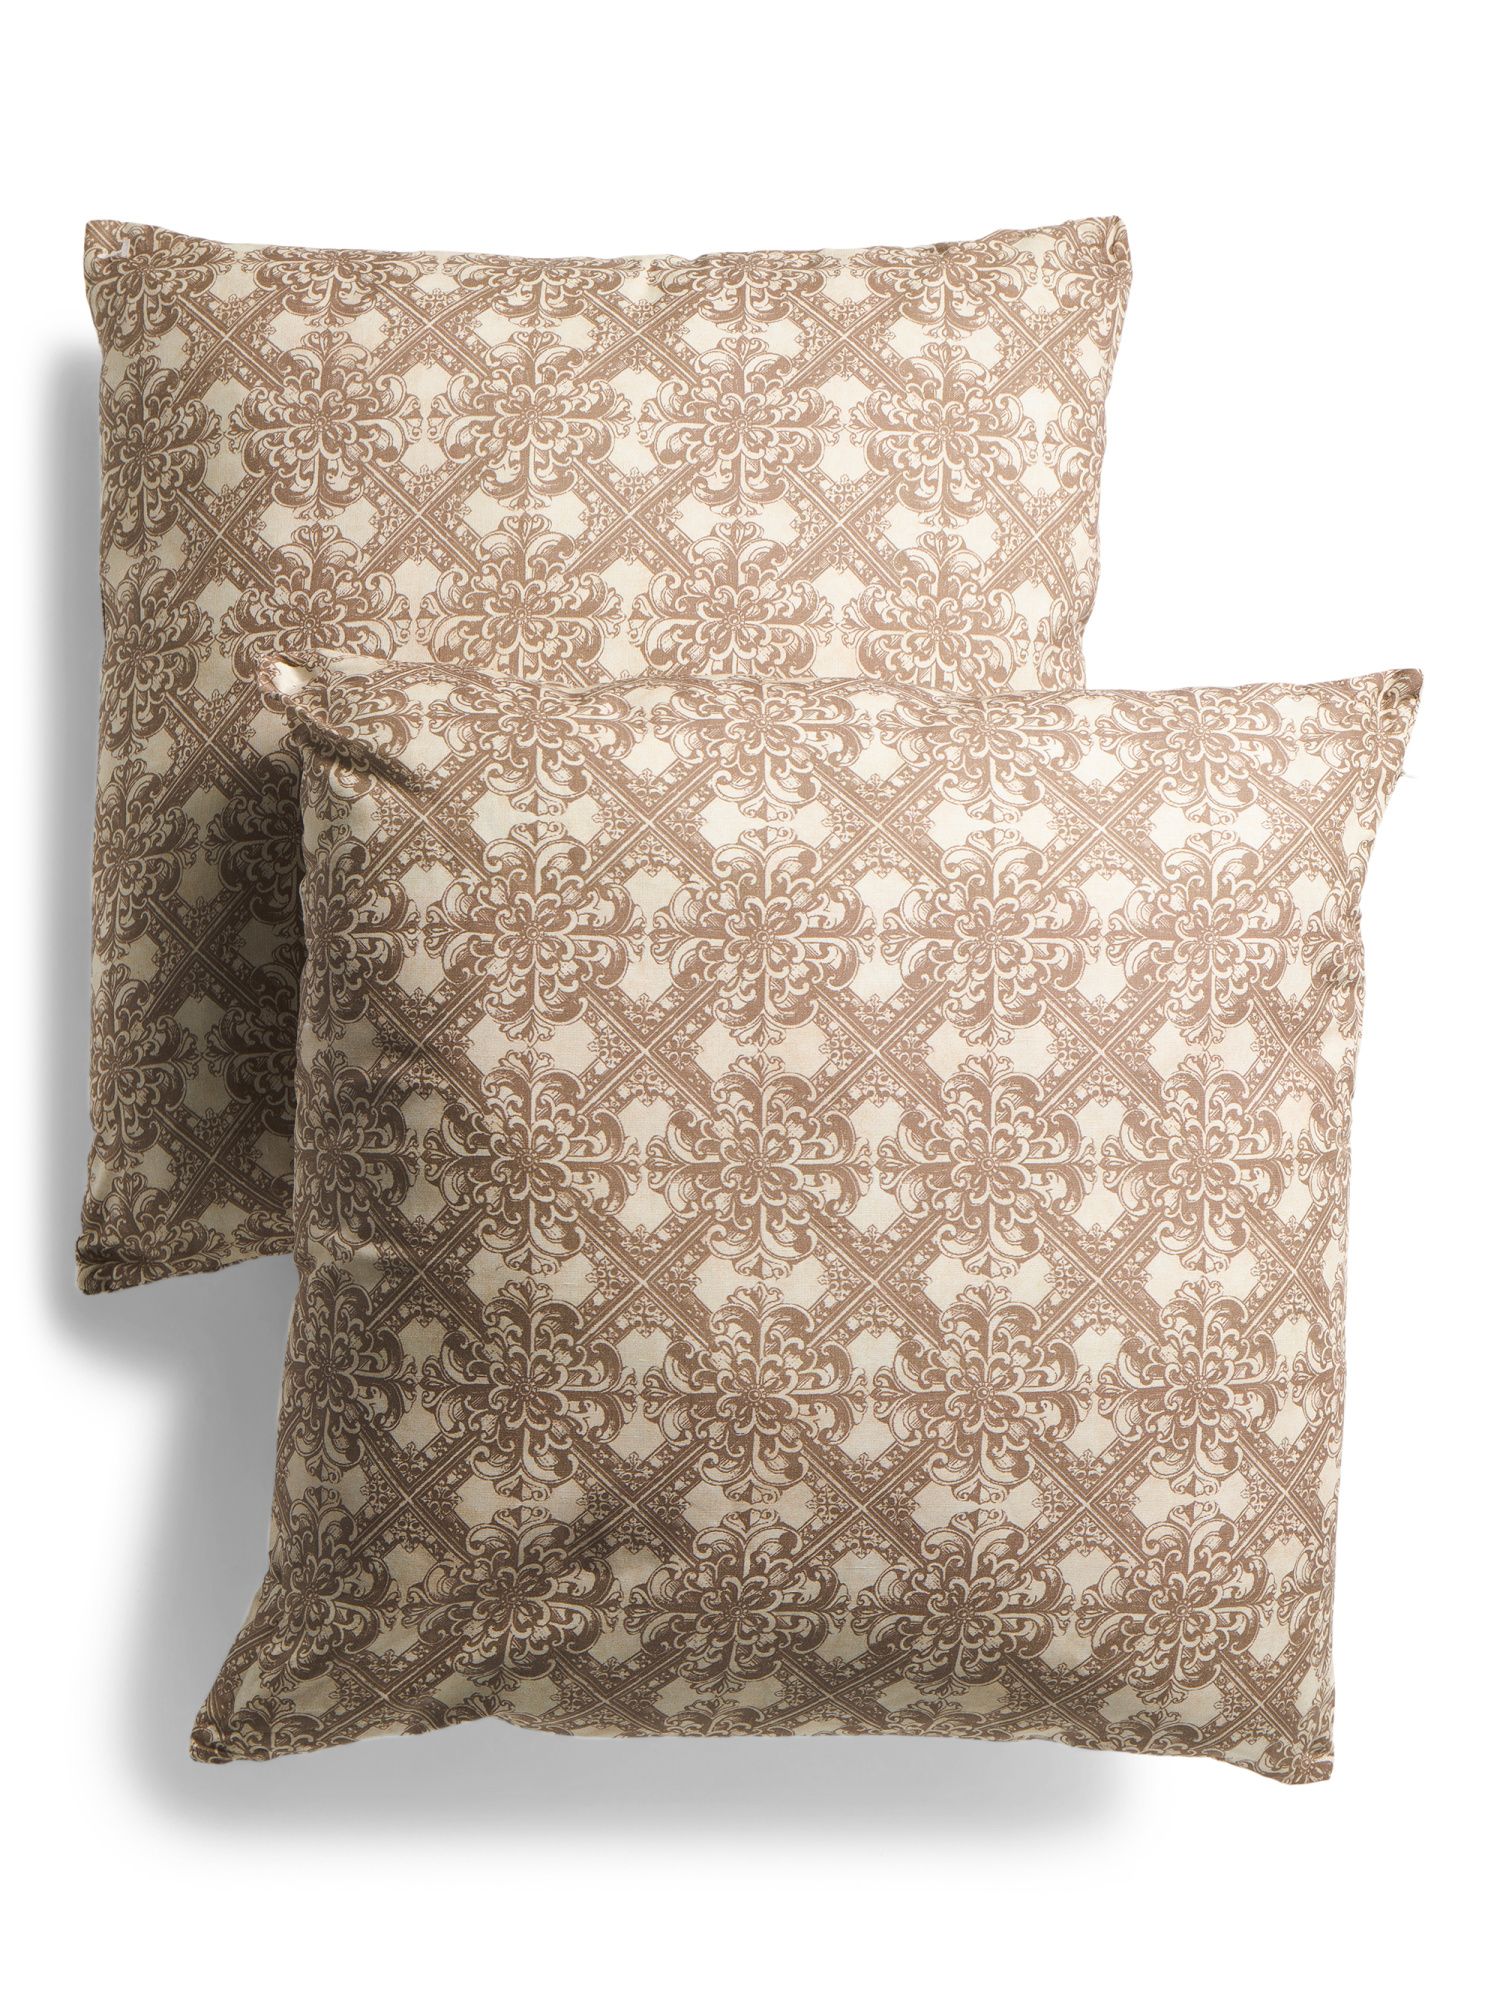 Made In Portugal 22x22 Set Of 2 Linen Pillows | TJ Maxx